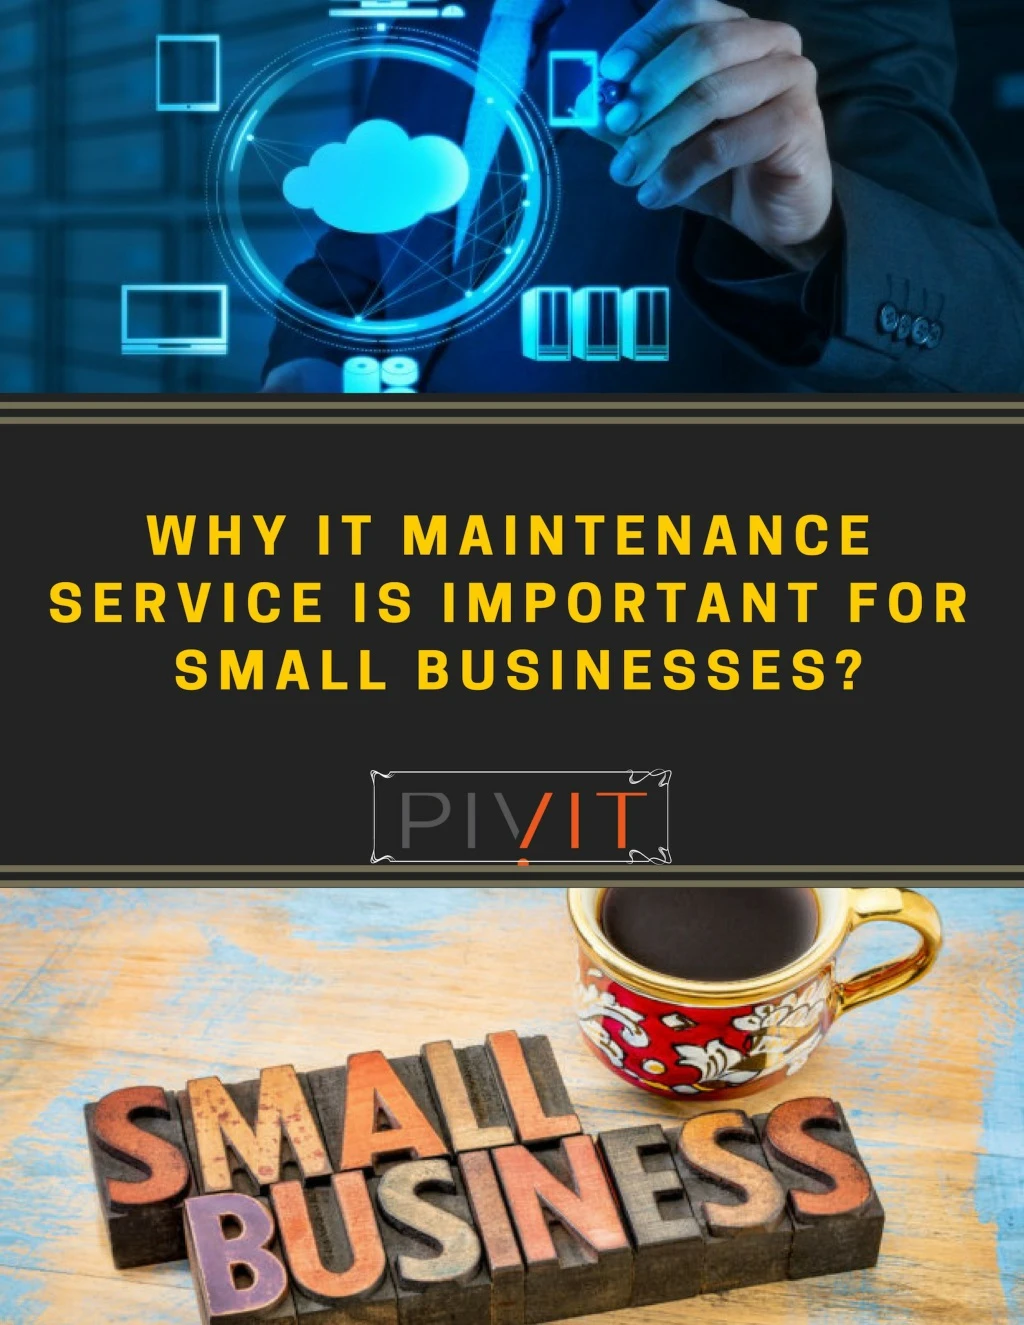 why is it maintenance service important for small